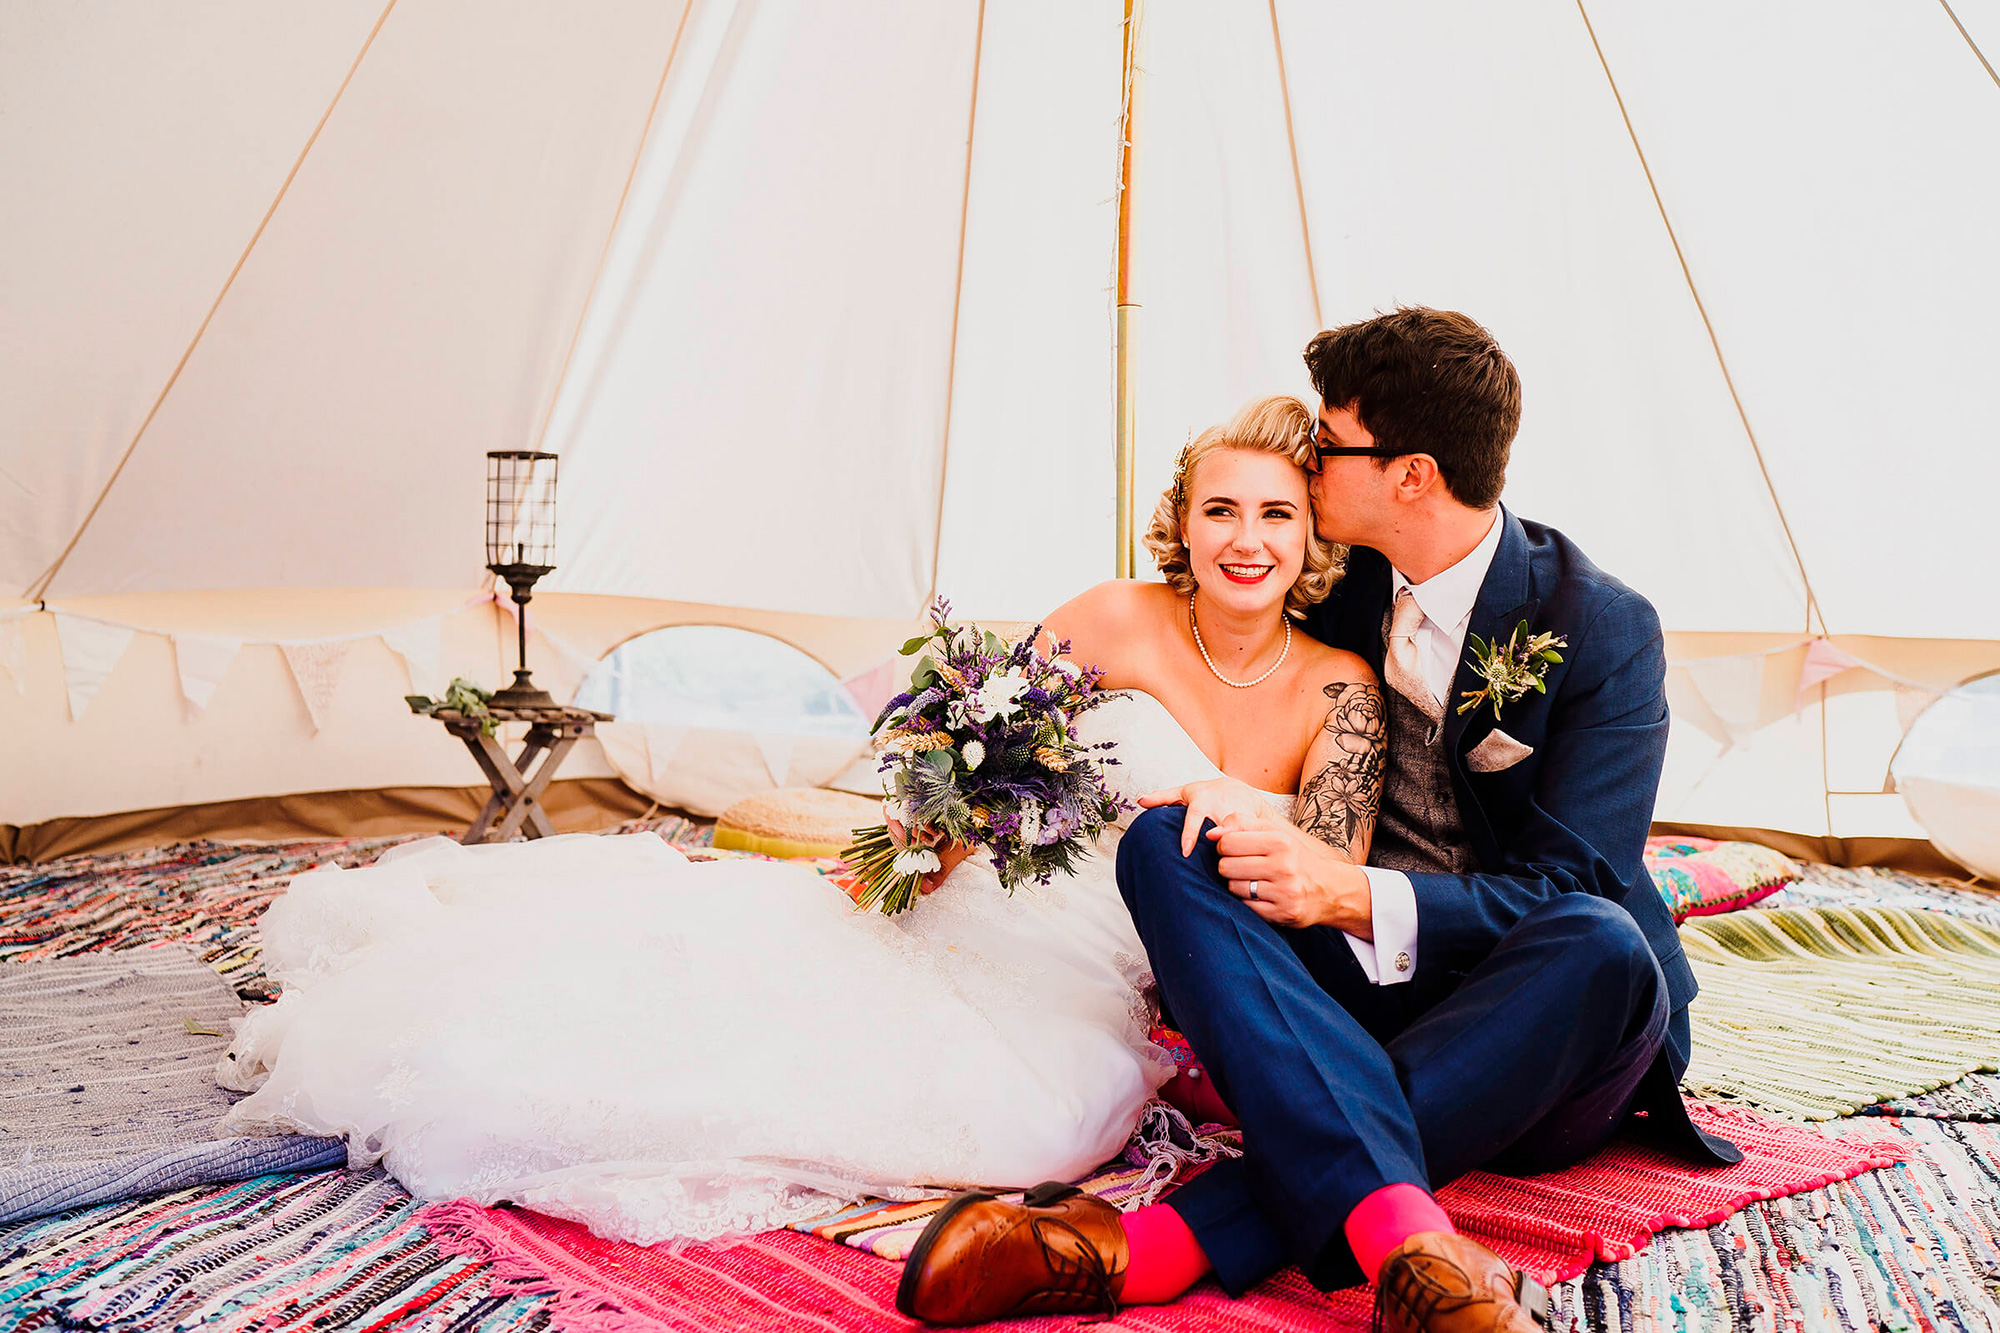 Lucy Simon Rustic Quirky Wedding Rob Dodsworth Photography 026